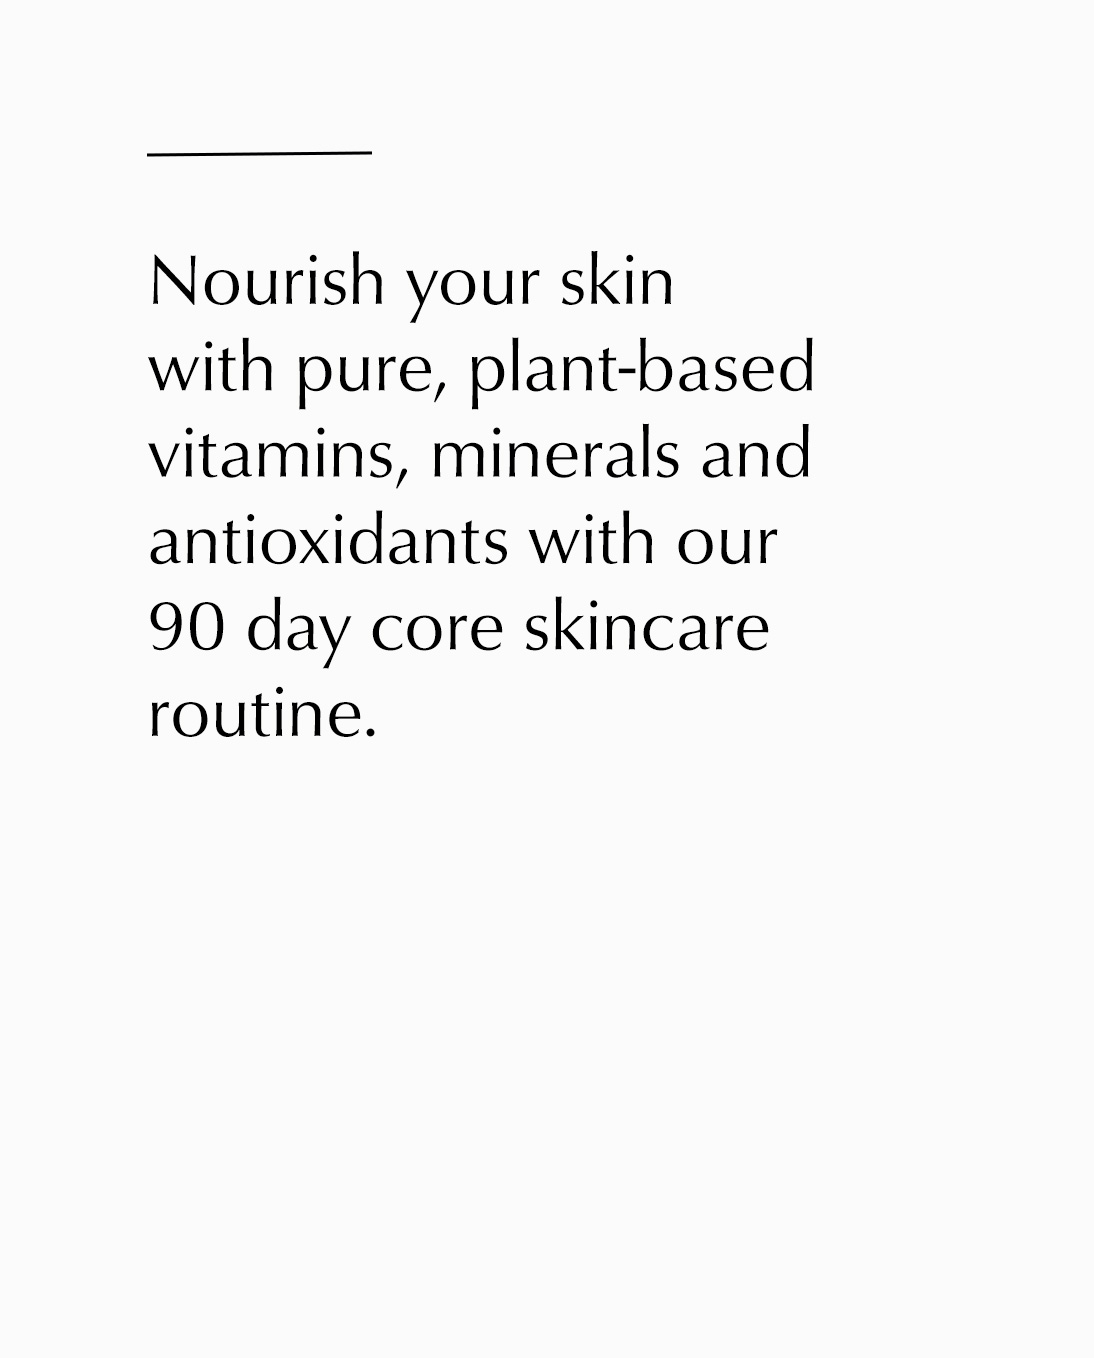 25 Herbs and Essential Oils for Skin – Organic Skin Care - Simple